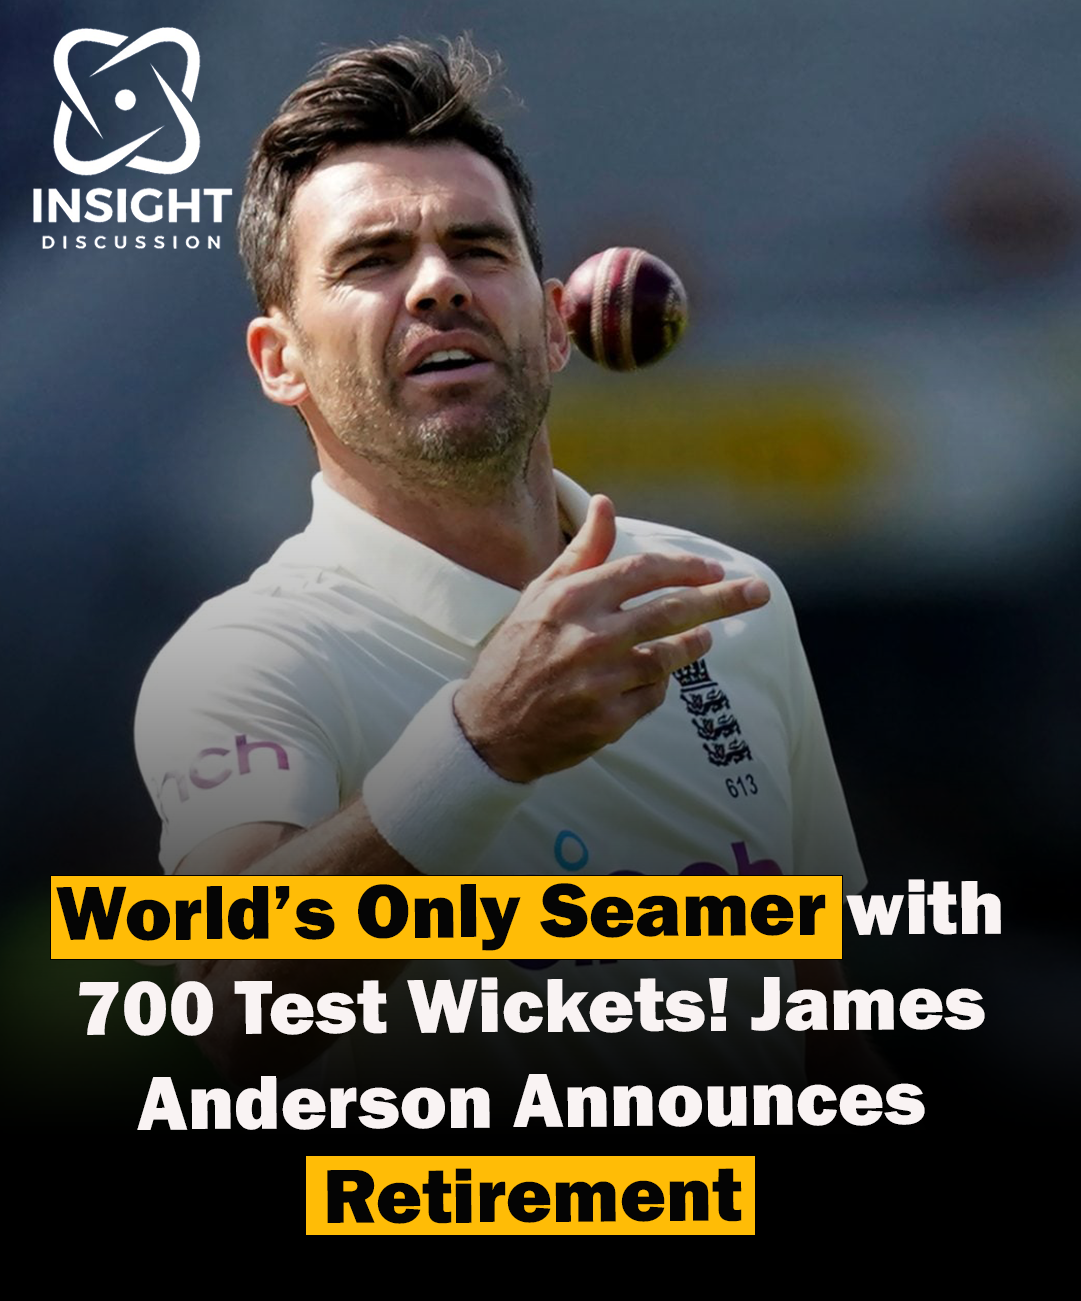 James Anderson Announces Retirement from International Cricket A Fond Farewell to a Legendary Career